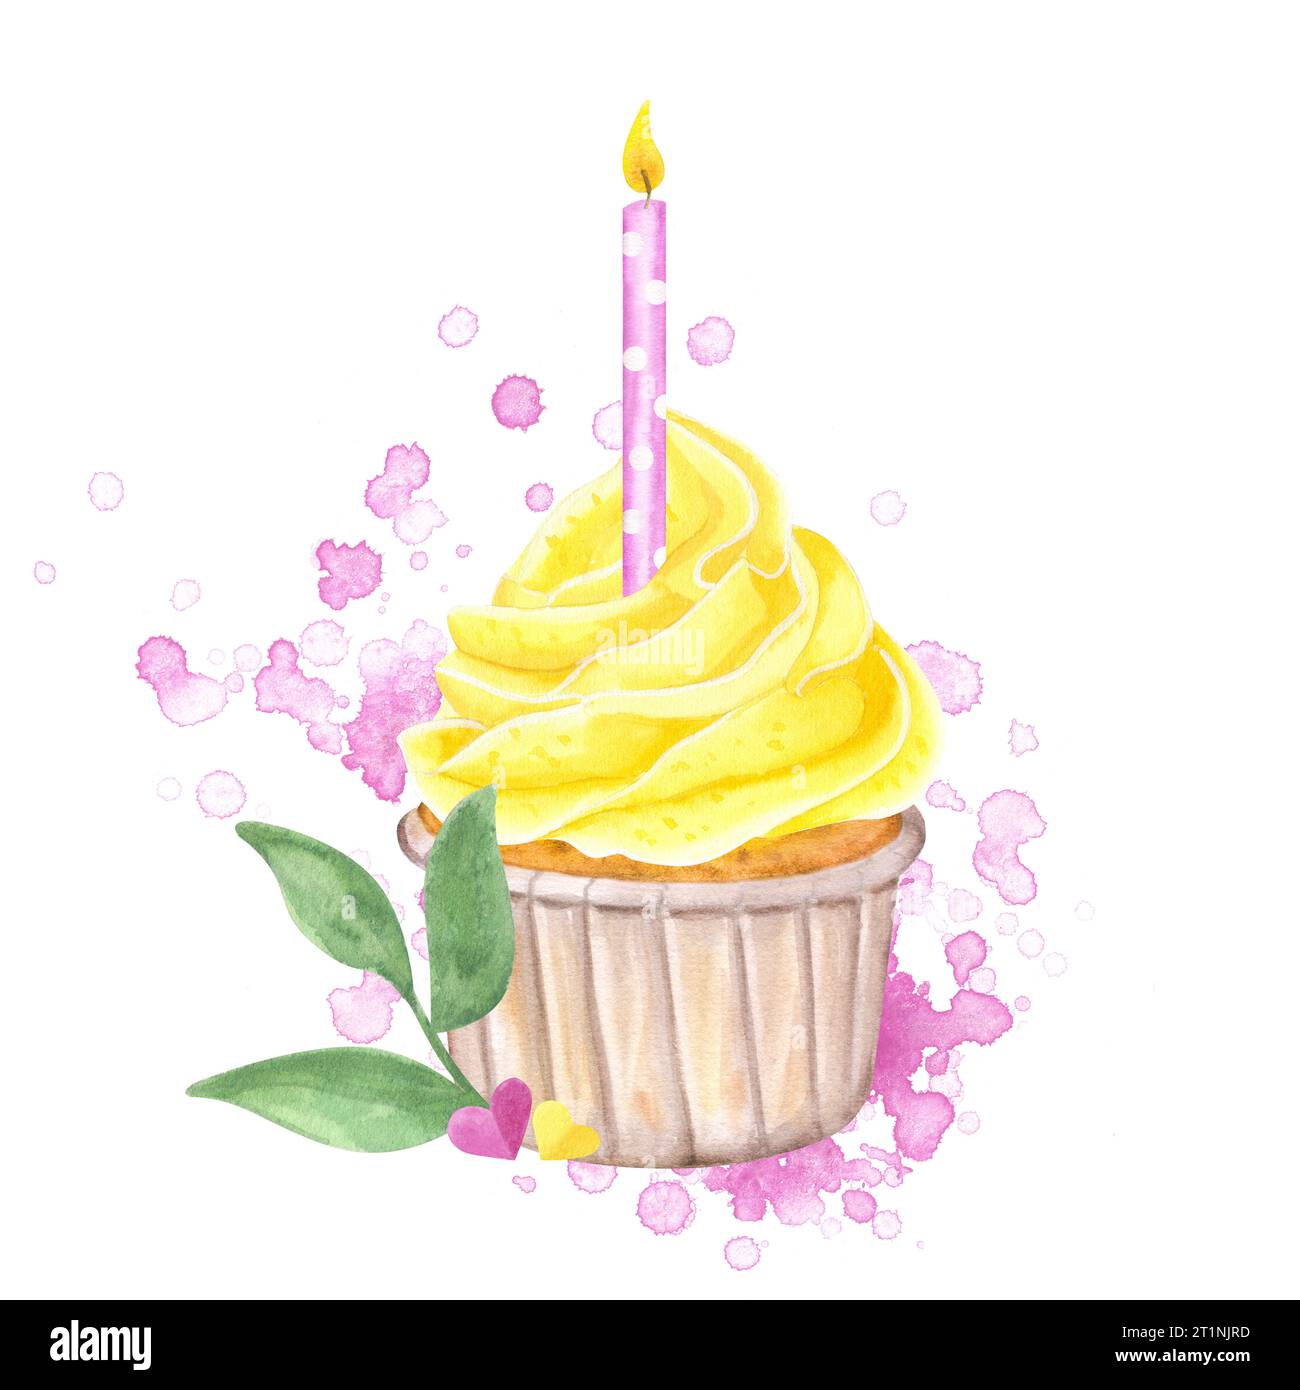 Watercolor cupcake with yellow whipped cream. Decorated pink candle, green leaves. Hand drawn illustration isolated on white background. Happy Stock Photo